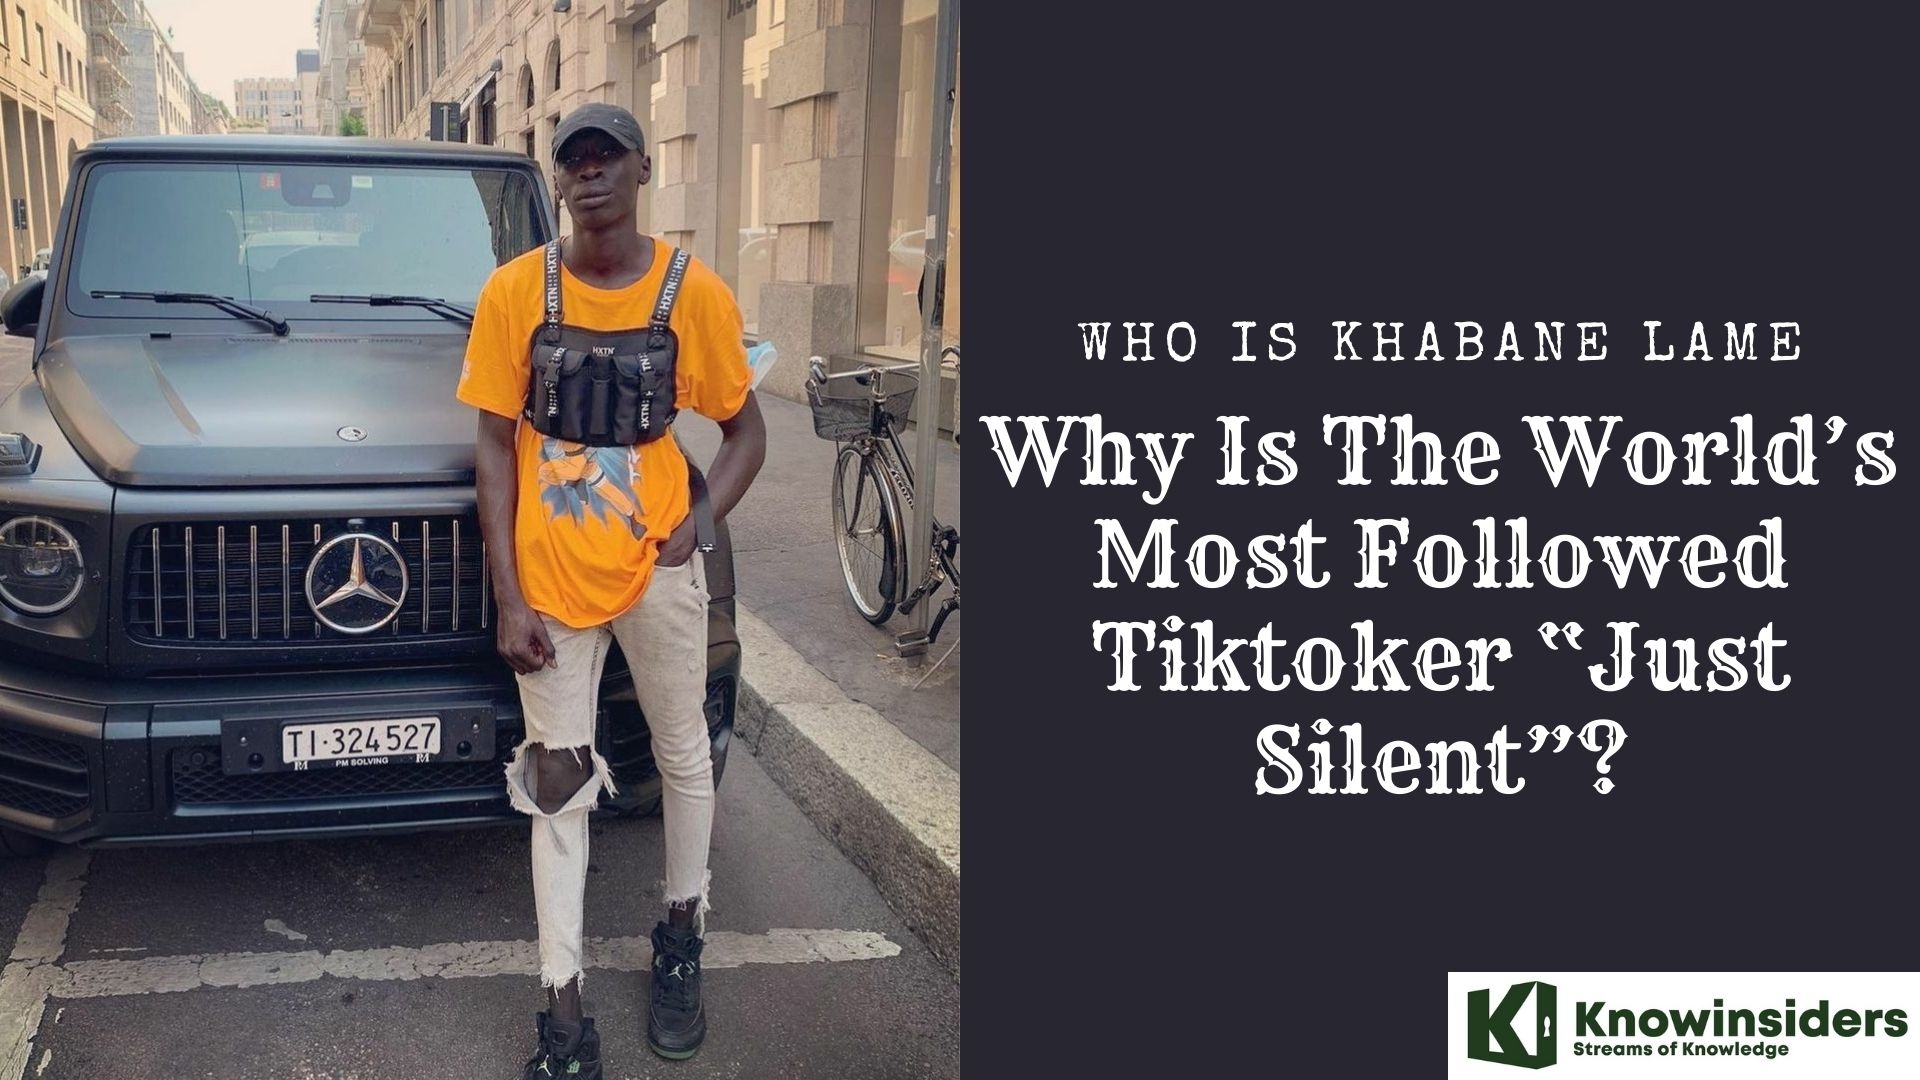 Who Is Khabane Lame And Why Is The World’s Most Followed Tiktoker “Just Silent”?